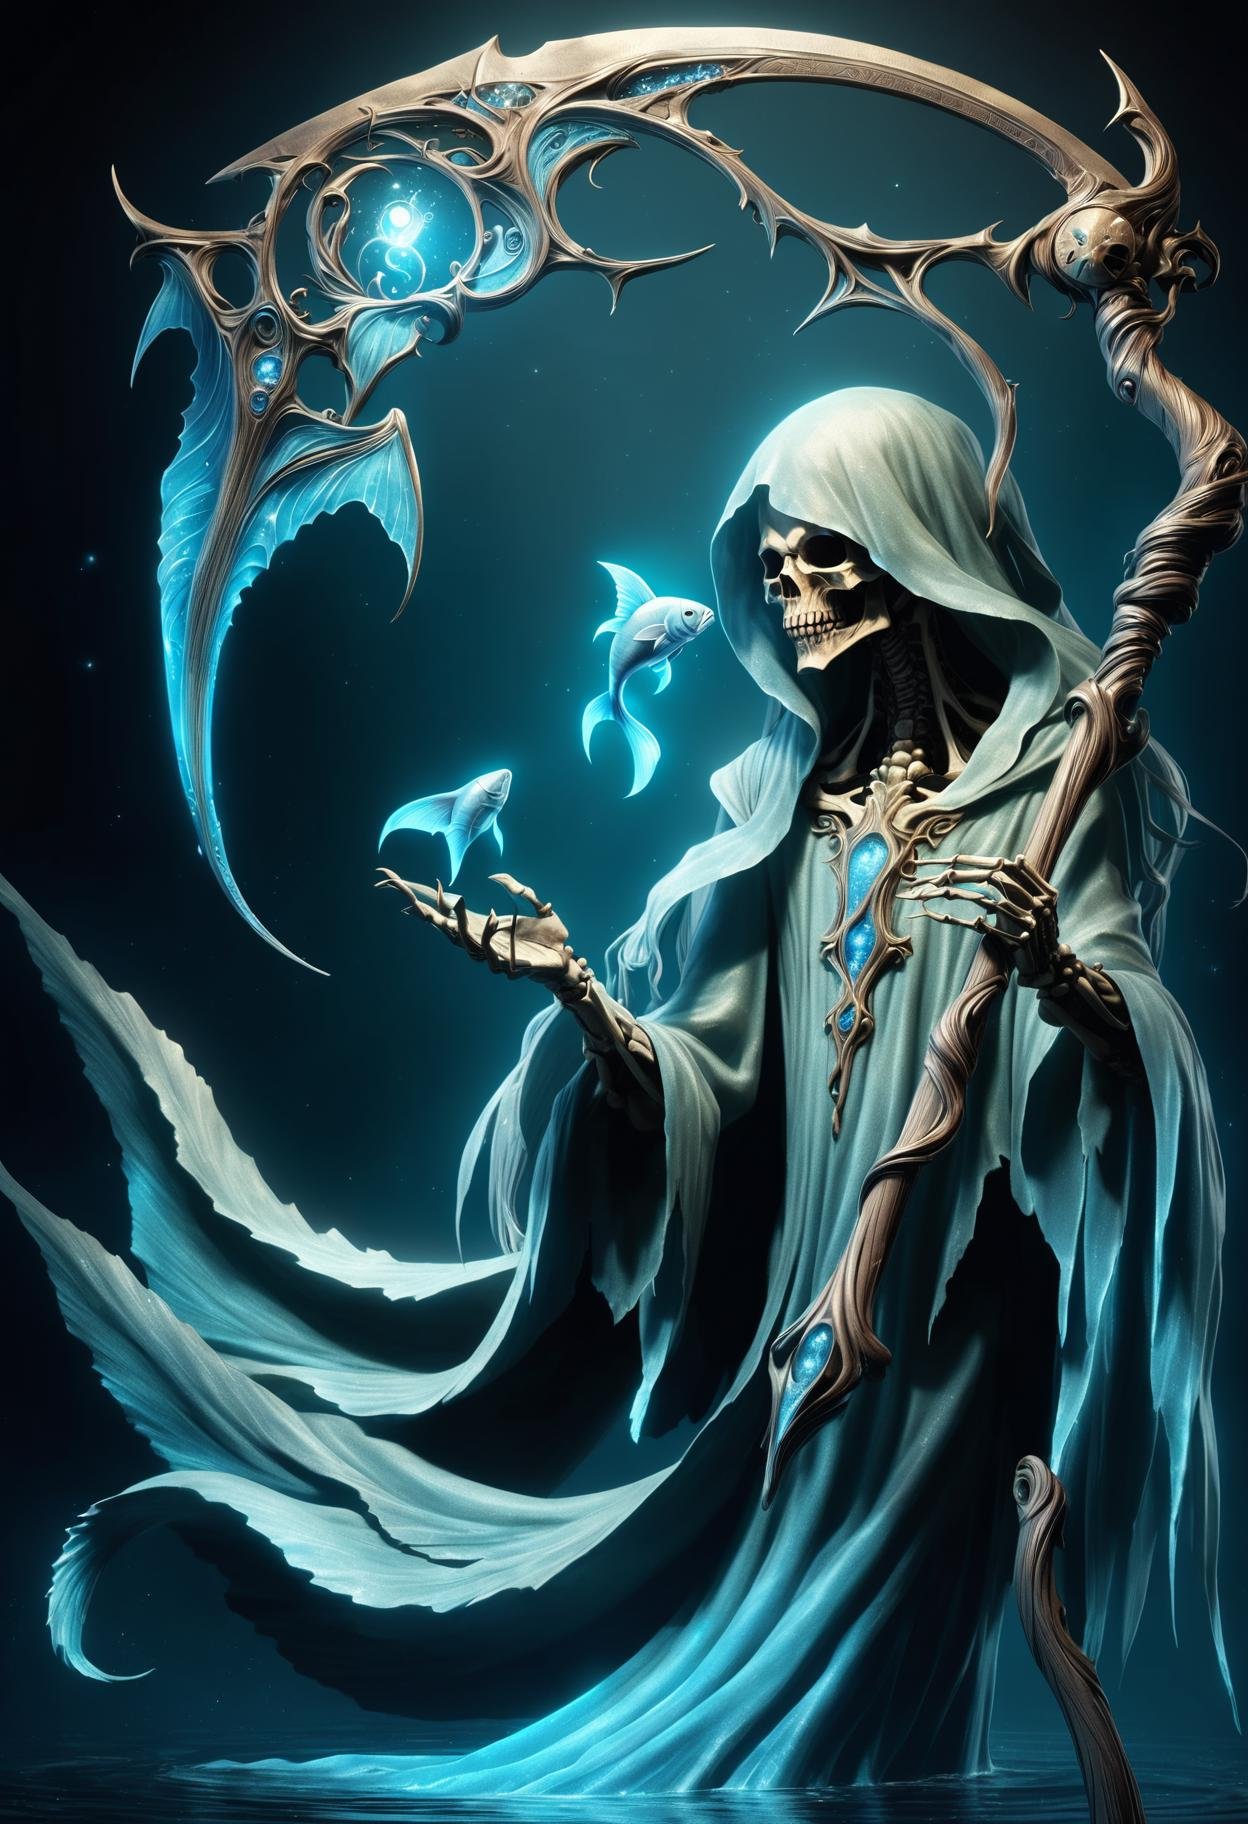 lich, humanoid upper body,fish tail, long flowing hair,   enchanting alluring appearance, aquatic beauty, aquatic hues, singing and enchanting melodic voices, varied, benevolent, classic,hot,kindle,starry,ambivalent  holding a DonM5cy7h3XL scythe, single blade  <lora:DonM5cy7h3XL-v1.1-000006:0.8>